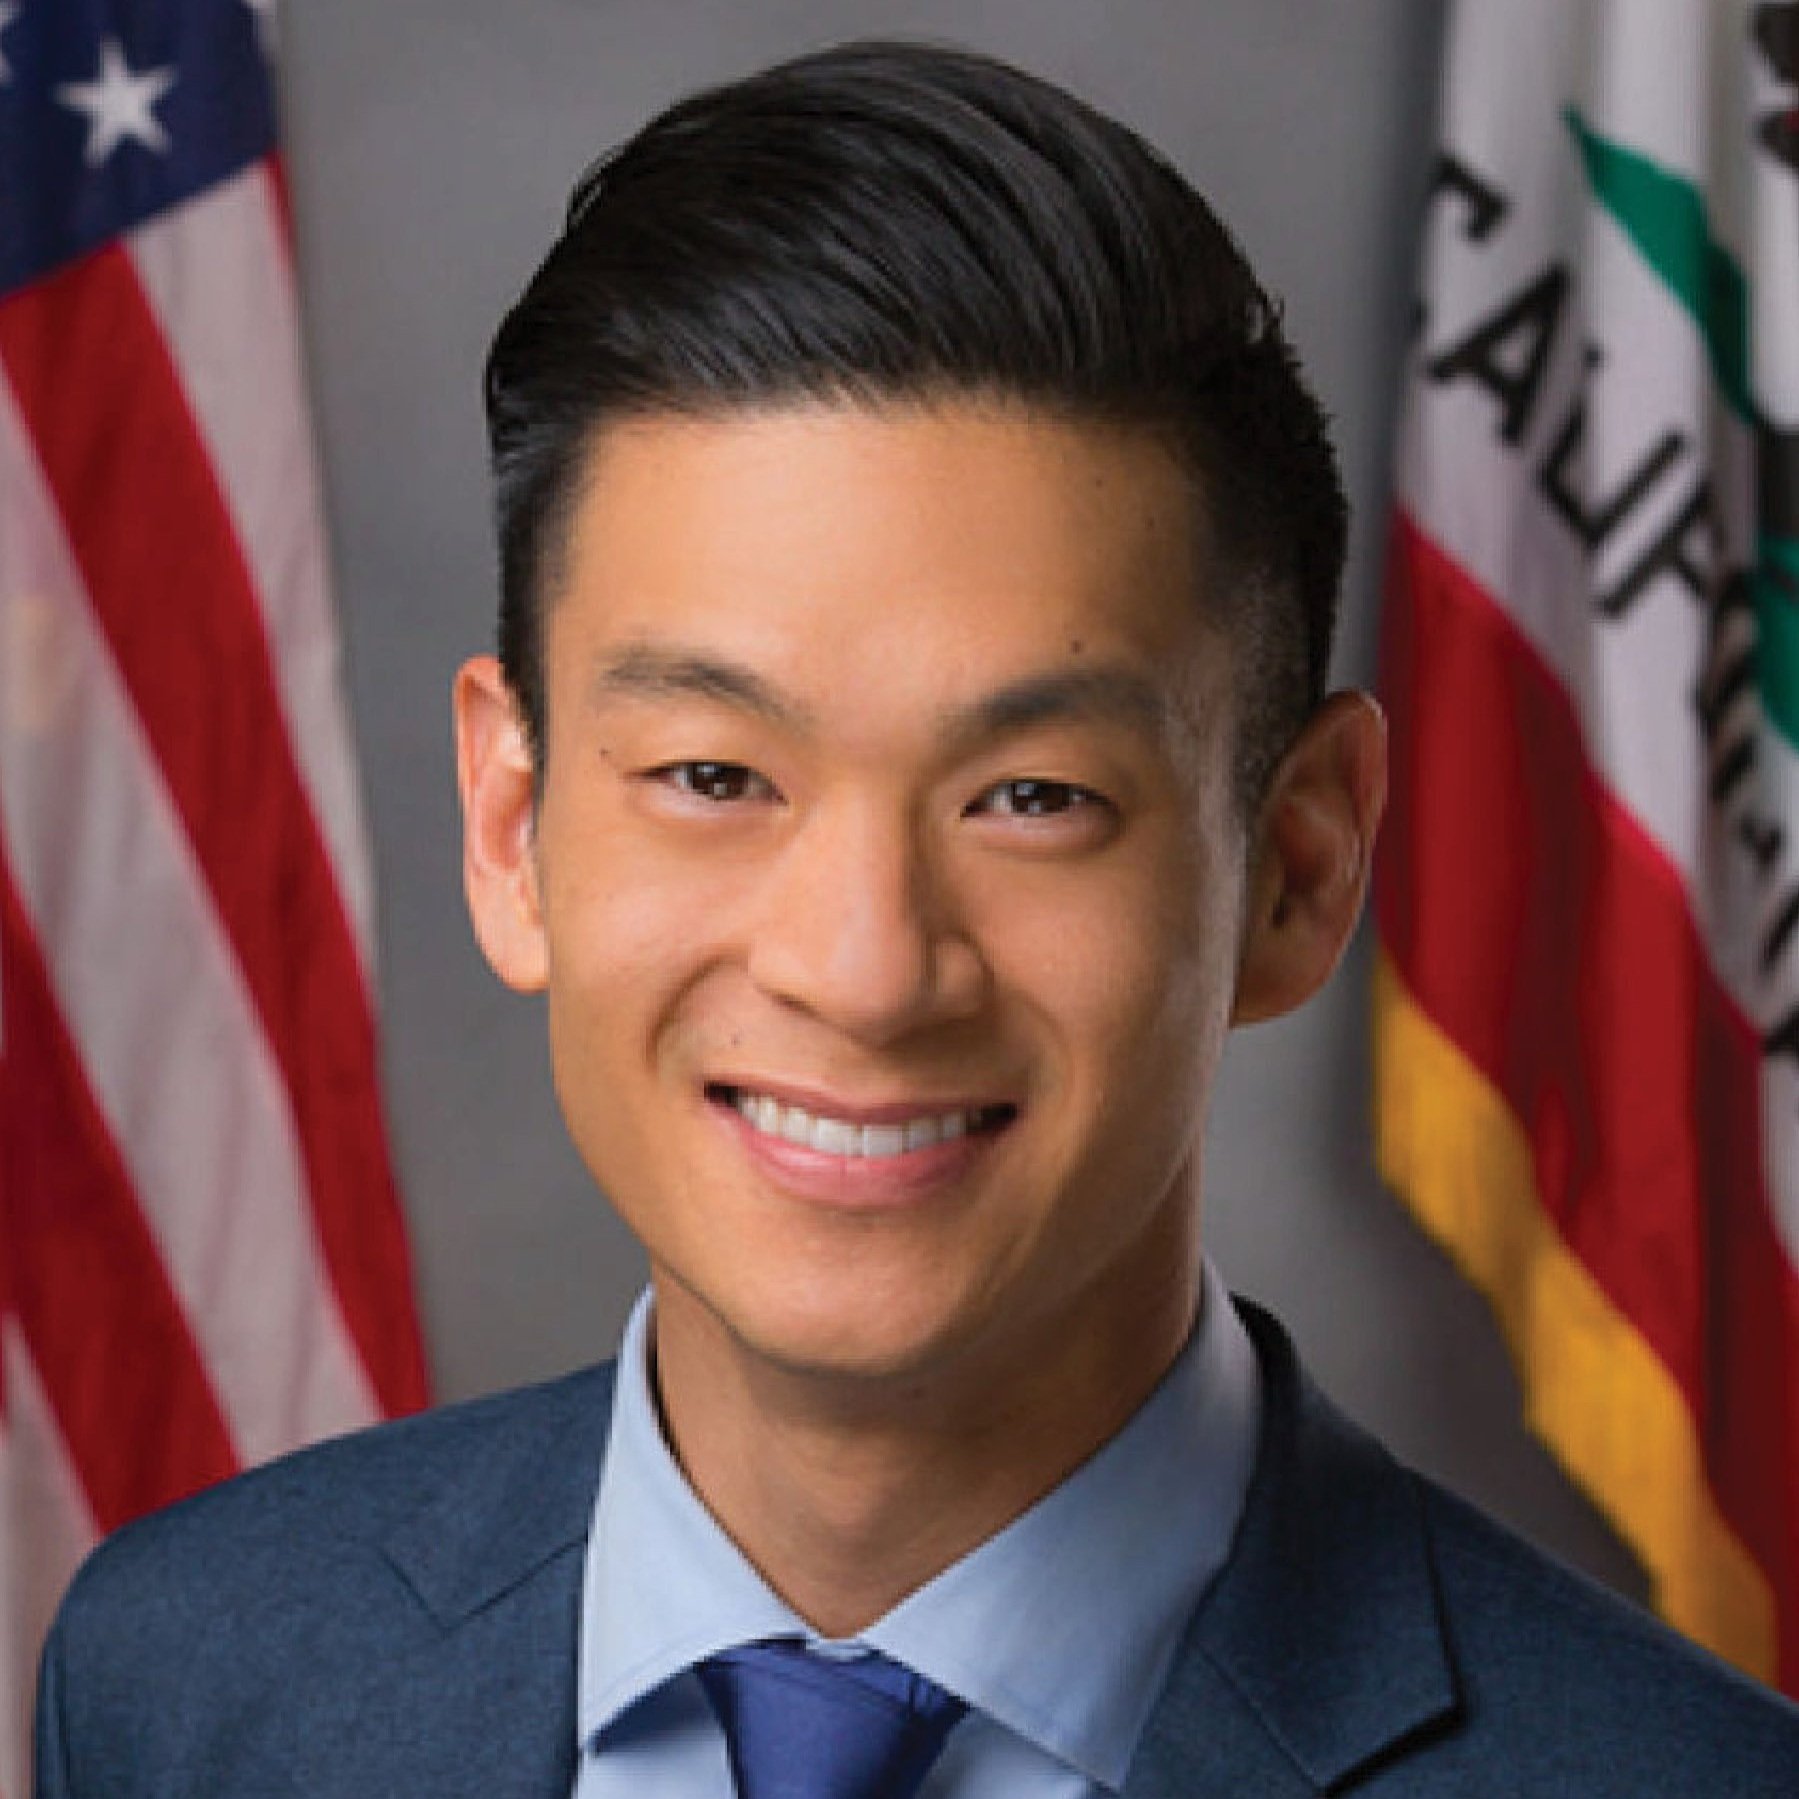 Assemblymember Evan Low, 26th District